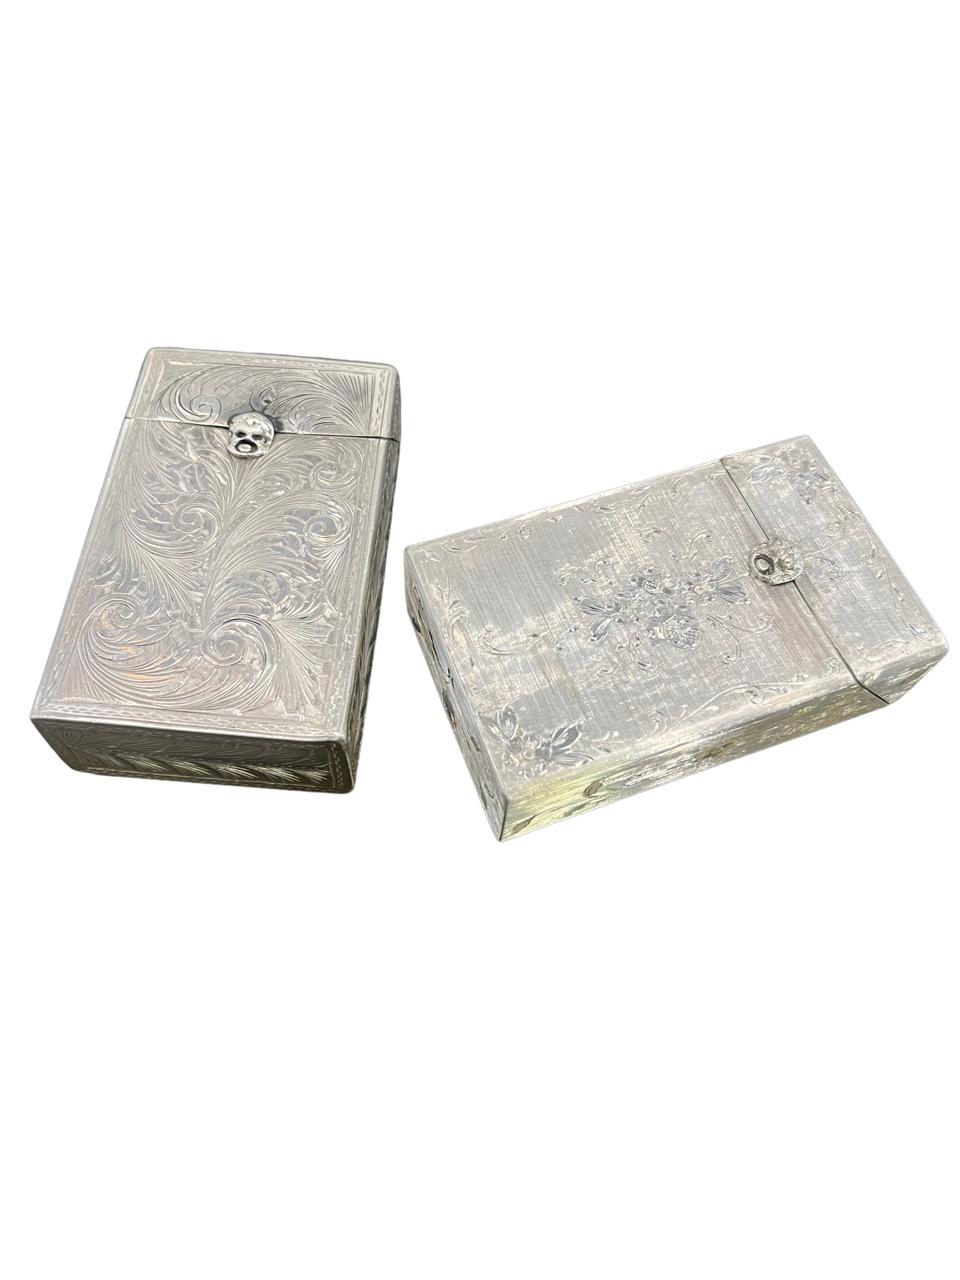 Set of two Sterling Silver Cigarette Cases 19th and 20 Century, Mario Buccellat In Fair Condition For Sale In North Miami, FL